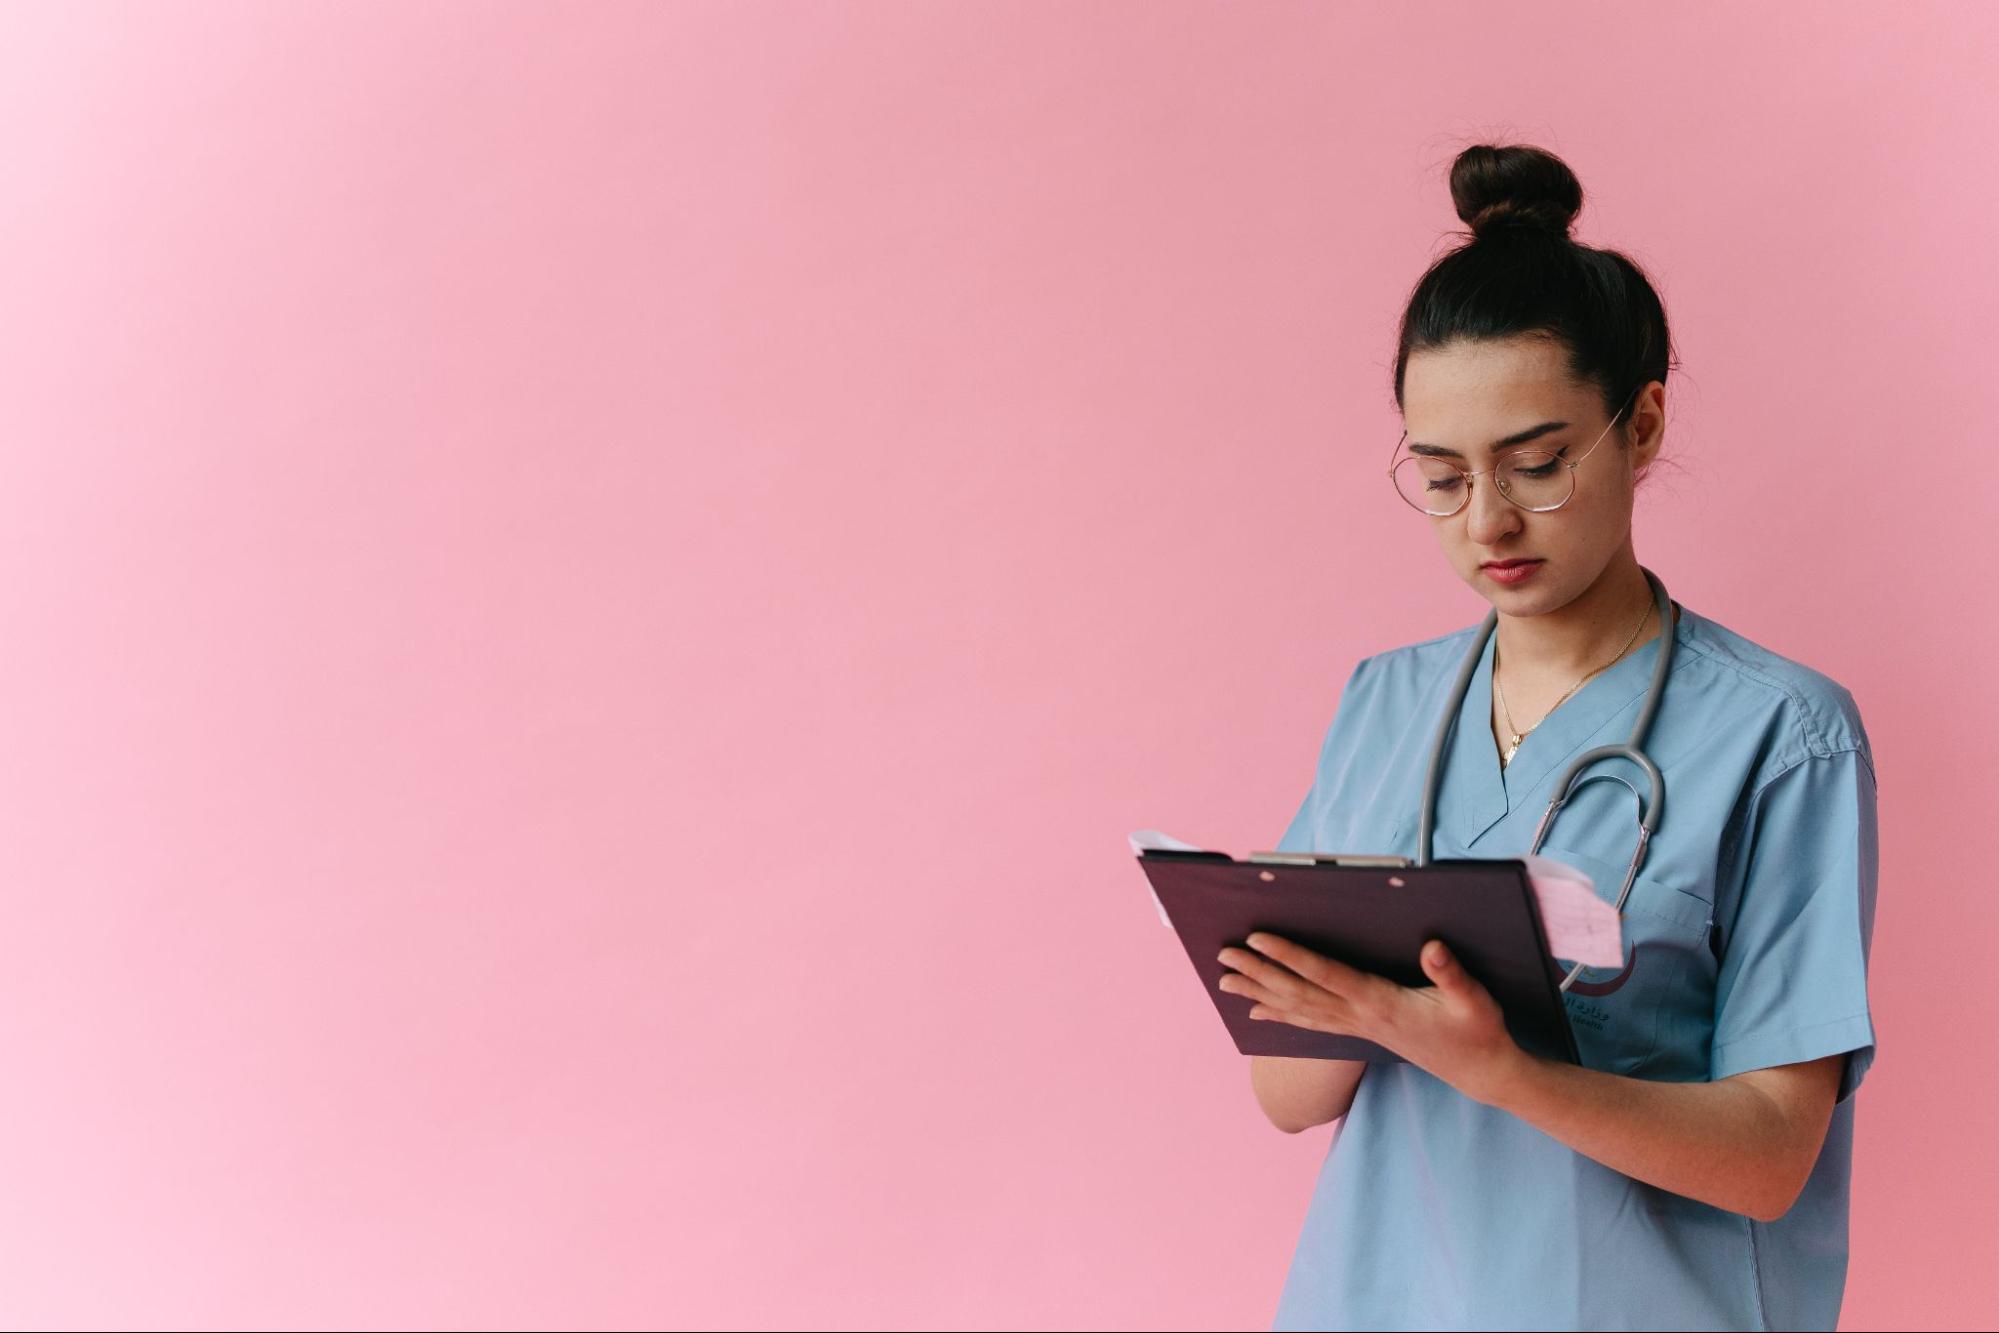 Nurse writing on clipboard against a pink background